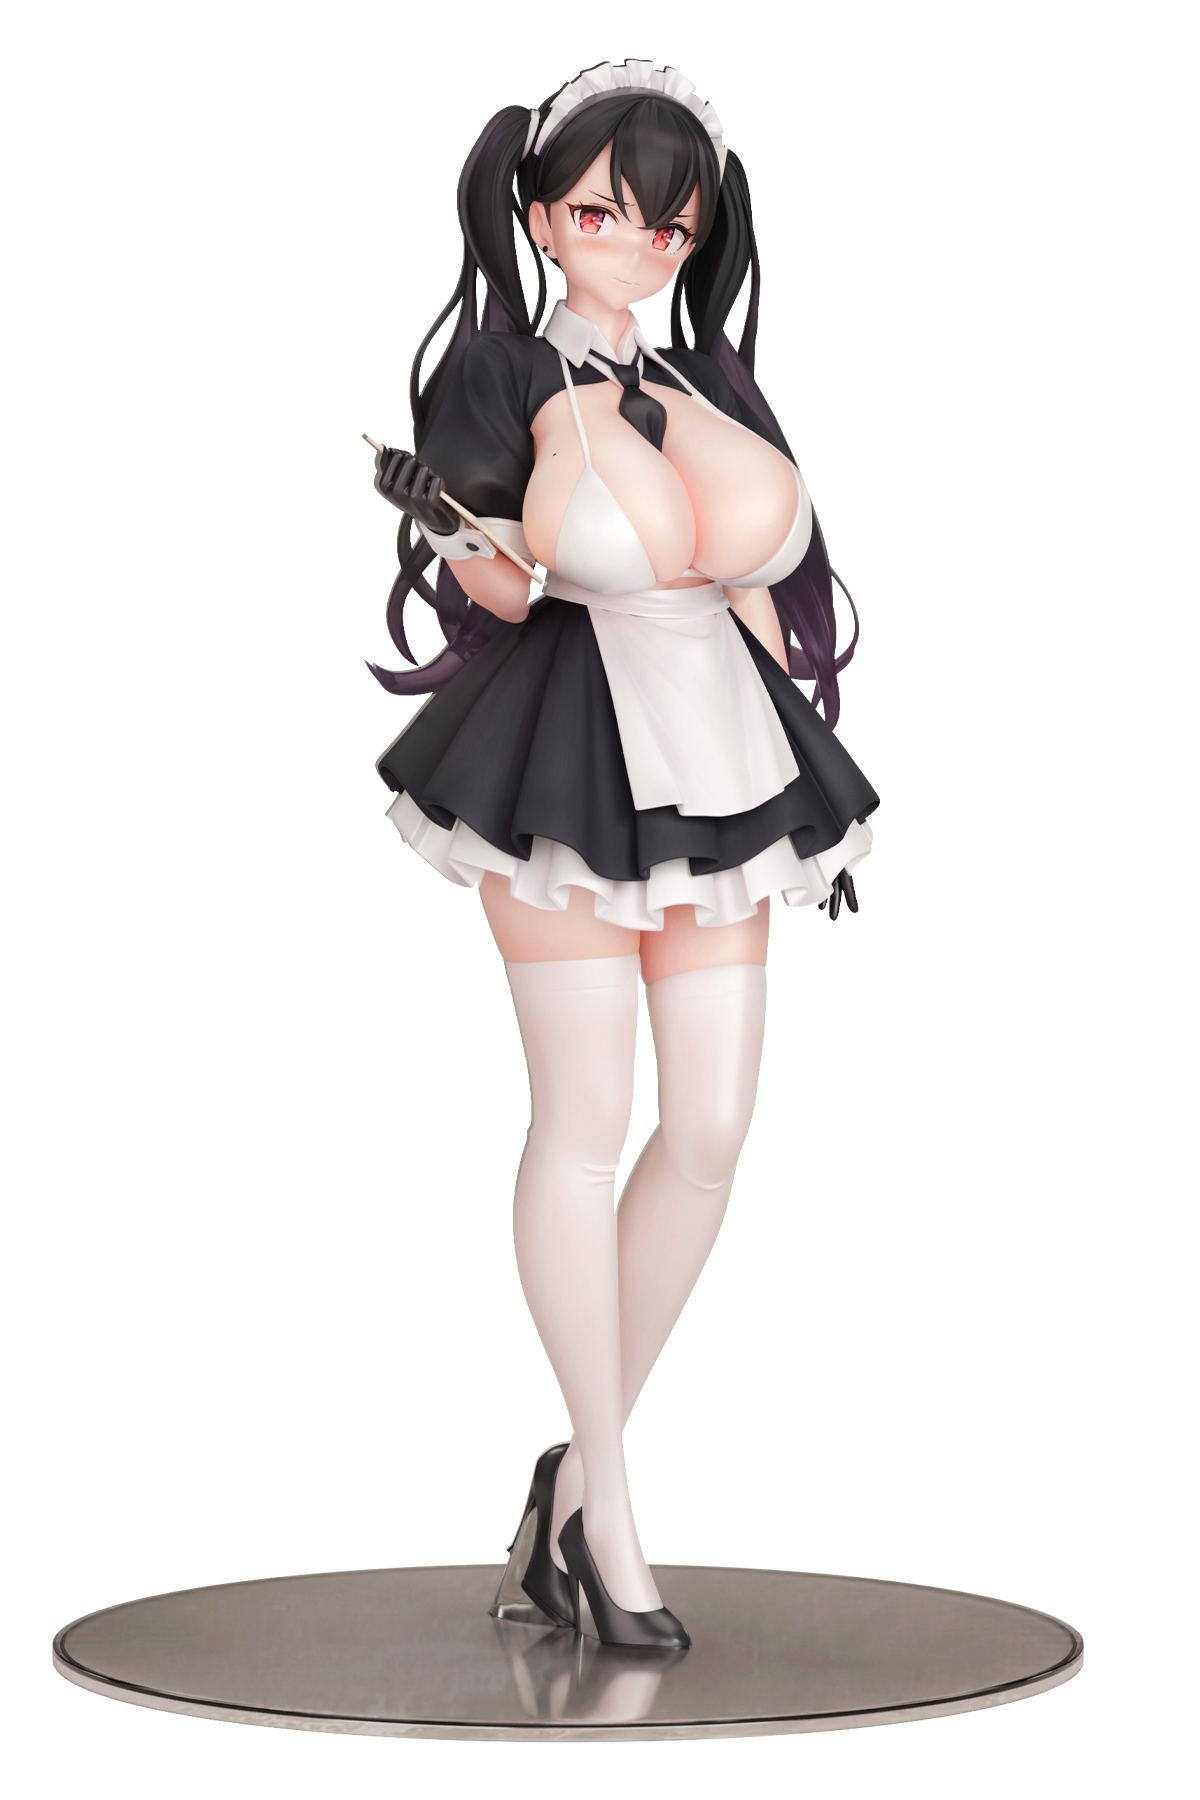 POPQN Original Illustration 1/6 Scale Pre-Painted Figure: High Hourly Wage Maid Cafe Clerk B'full Fots Japan